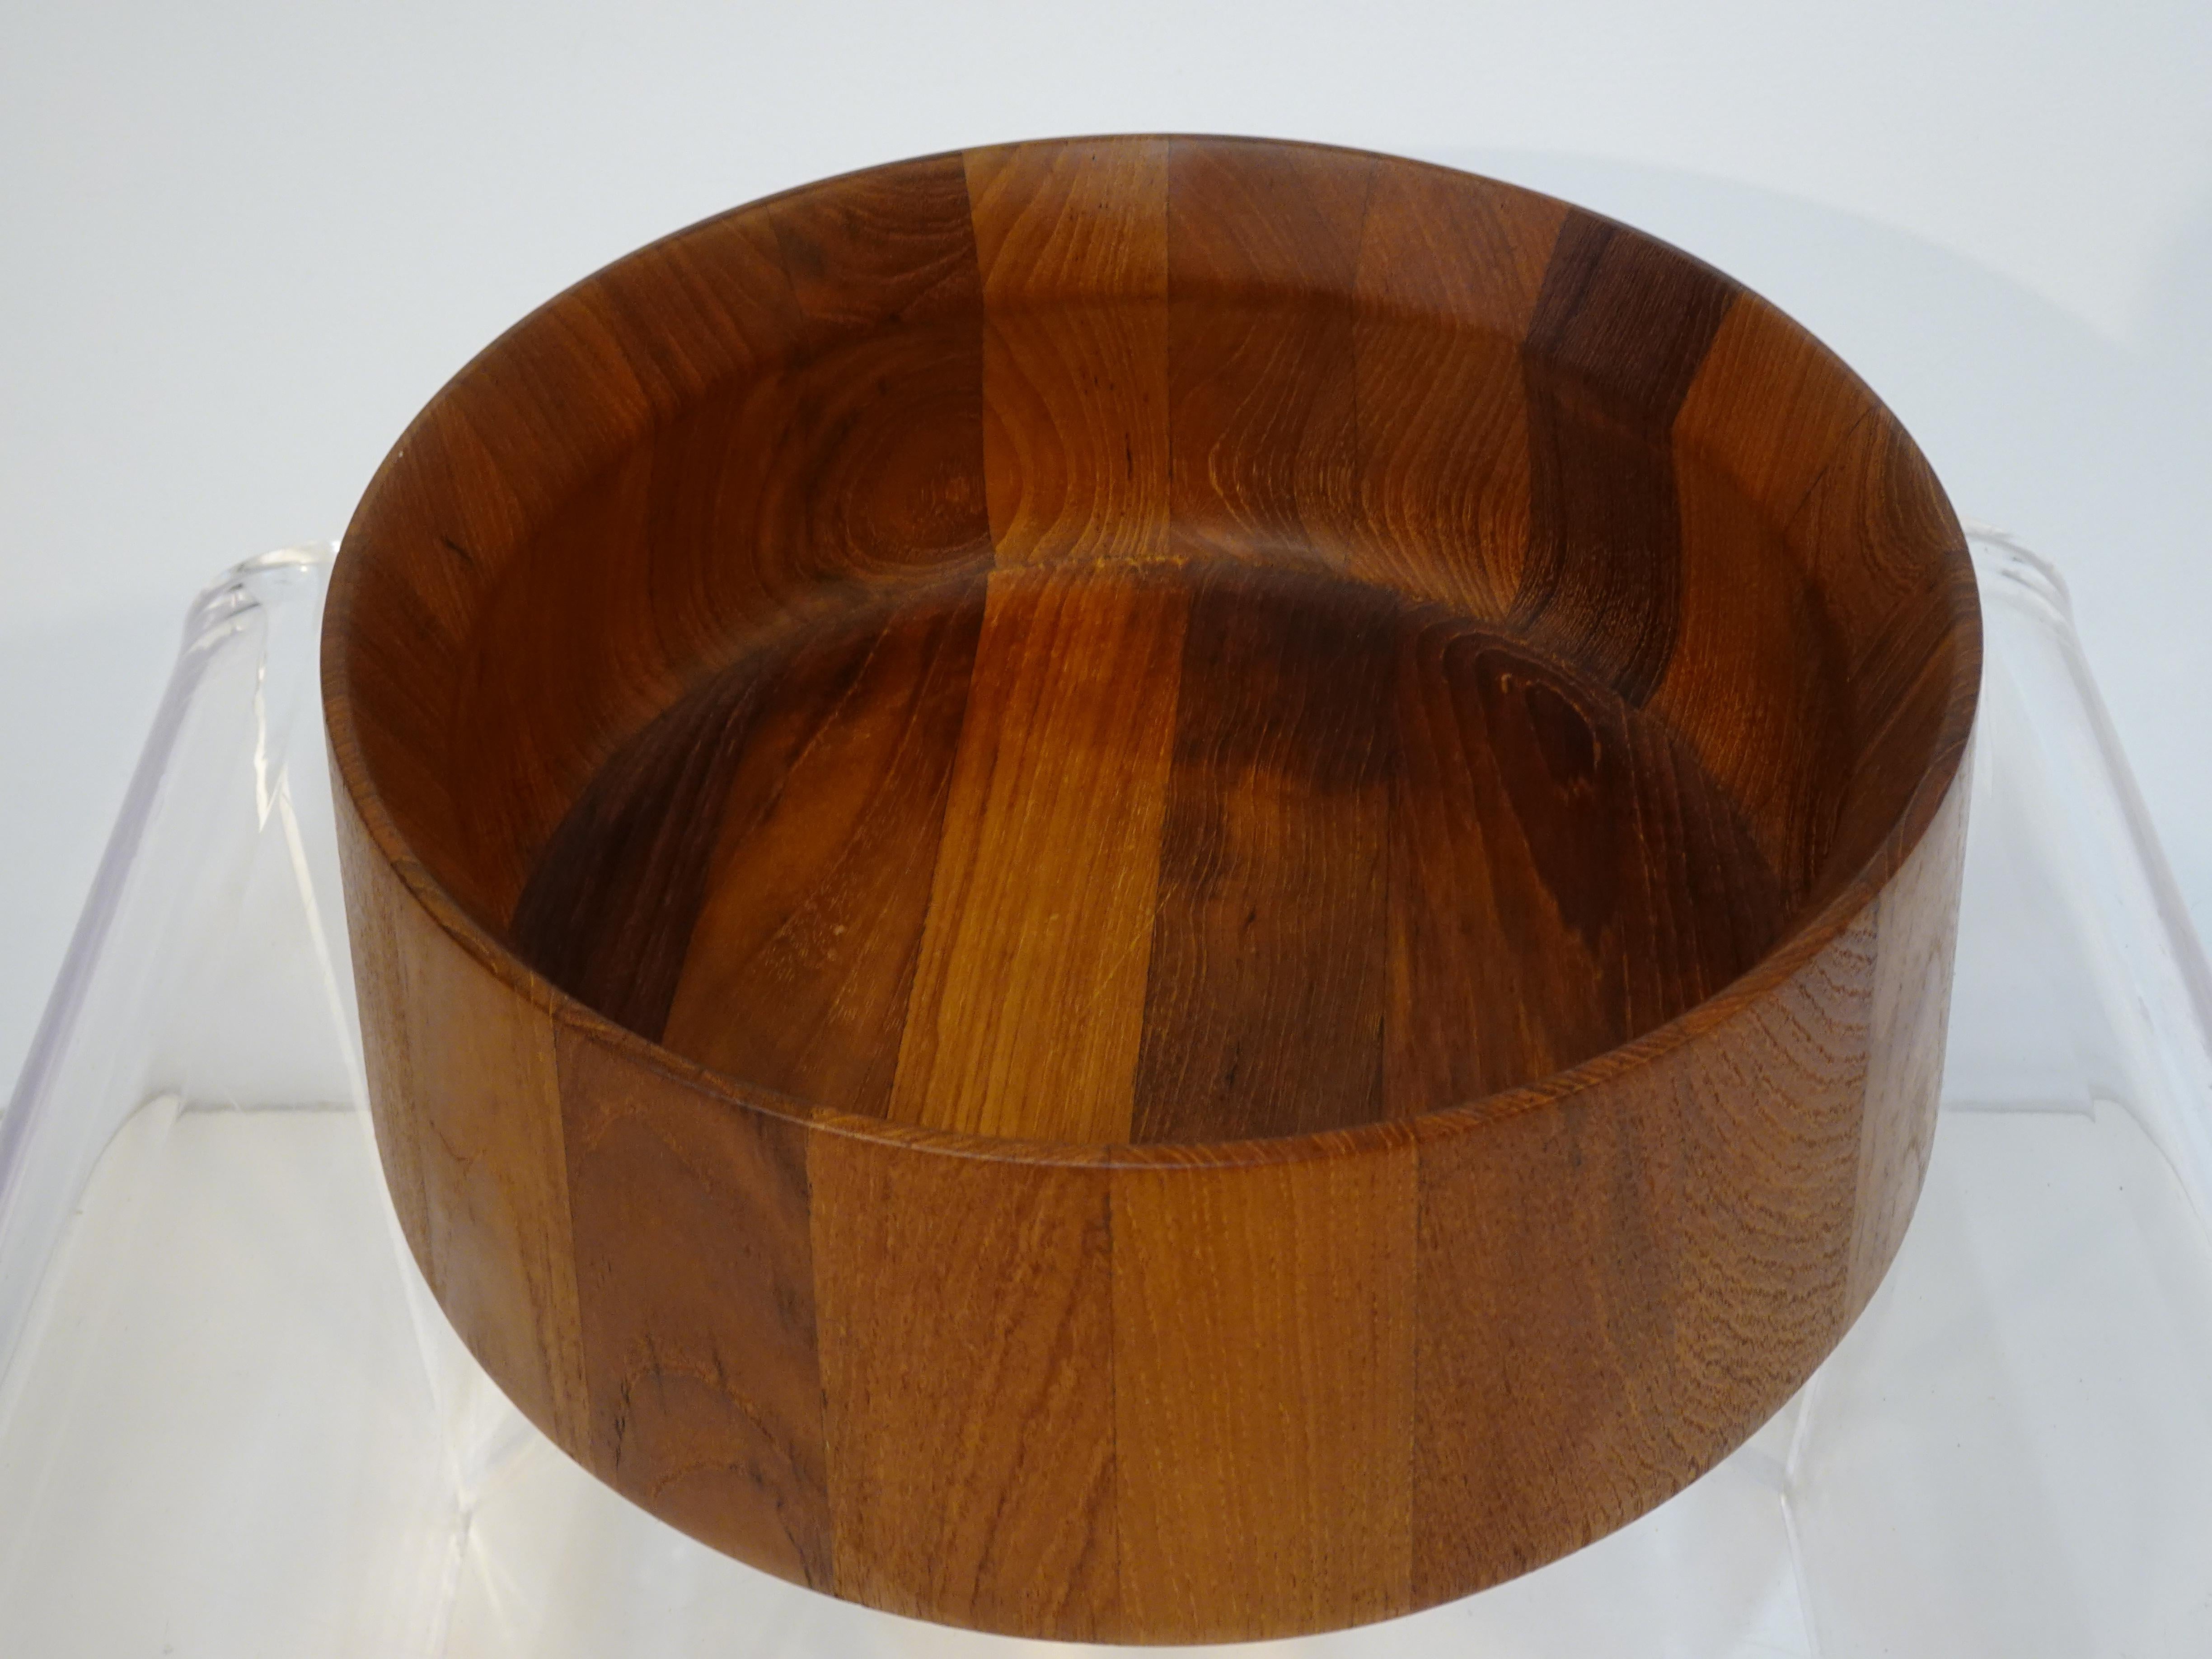 A teak serving bowl designed by the iconic designer Jens H. Quistgaard who's organic pieces including pepper mills, serving pieces and furniture were both practical and beautiful . The manufactures branded mark is to the bottom of the bowl Dansk